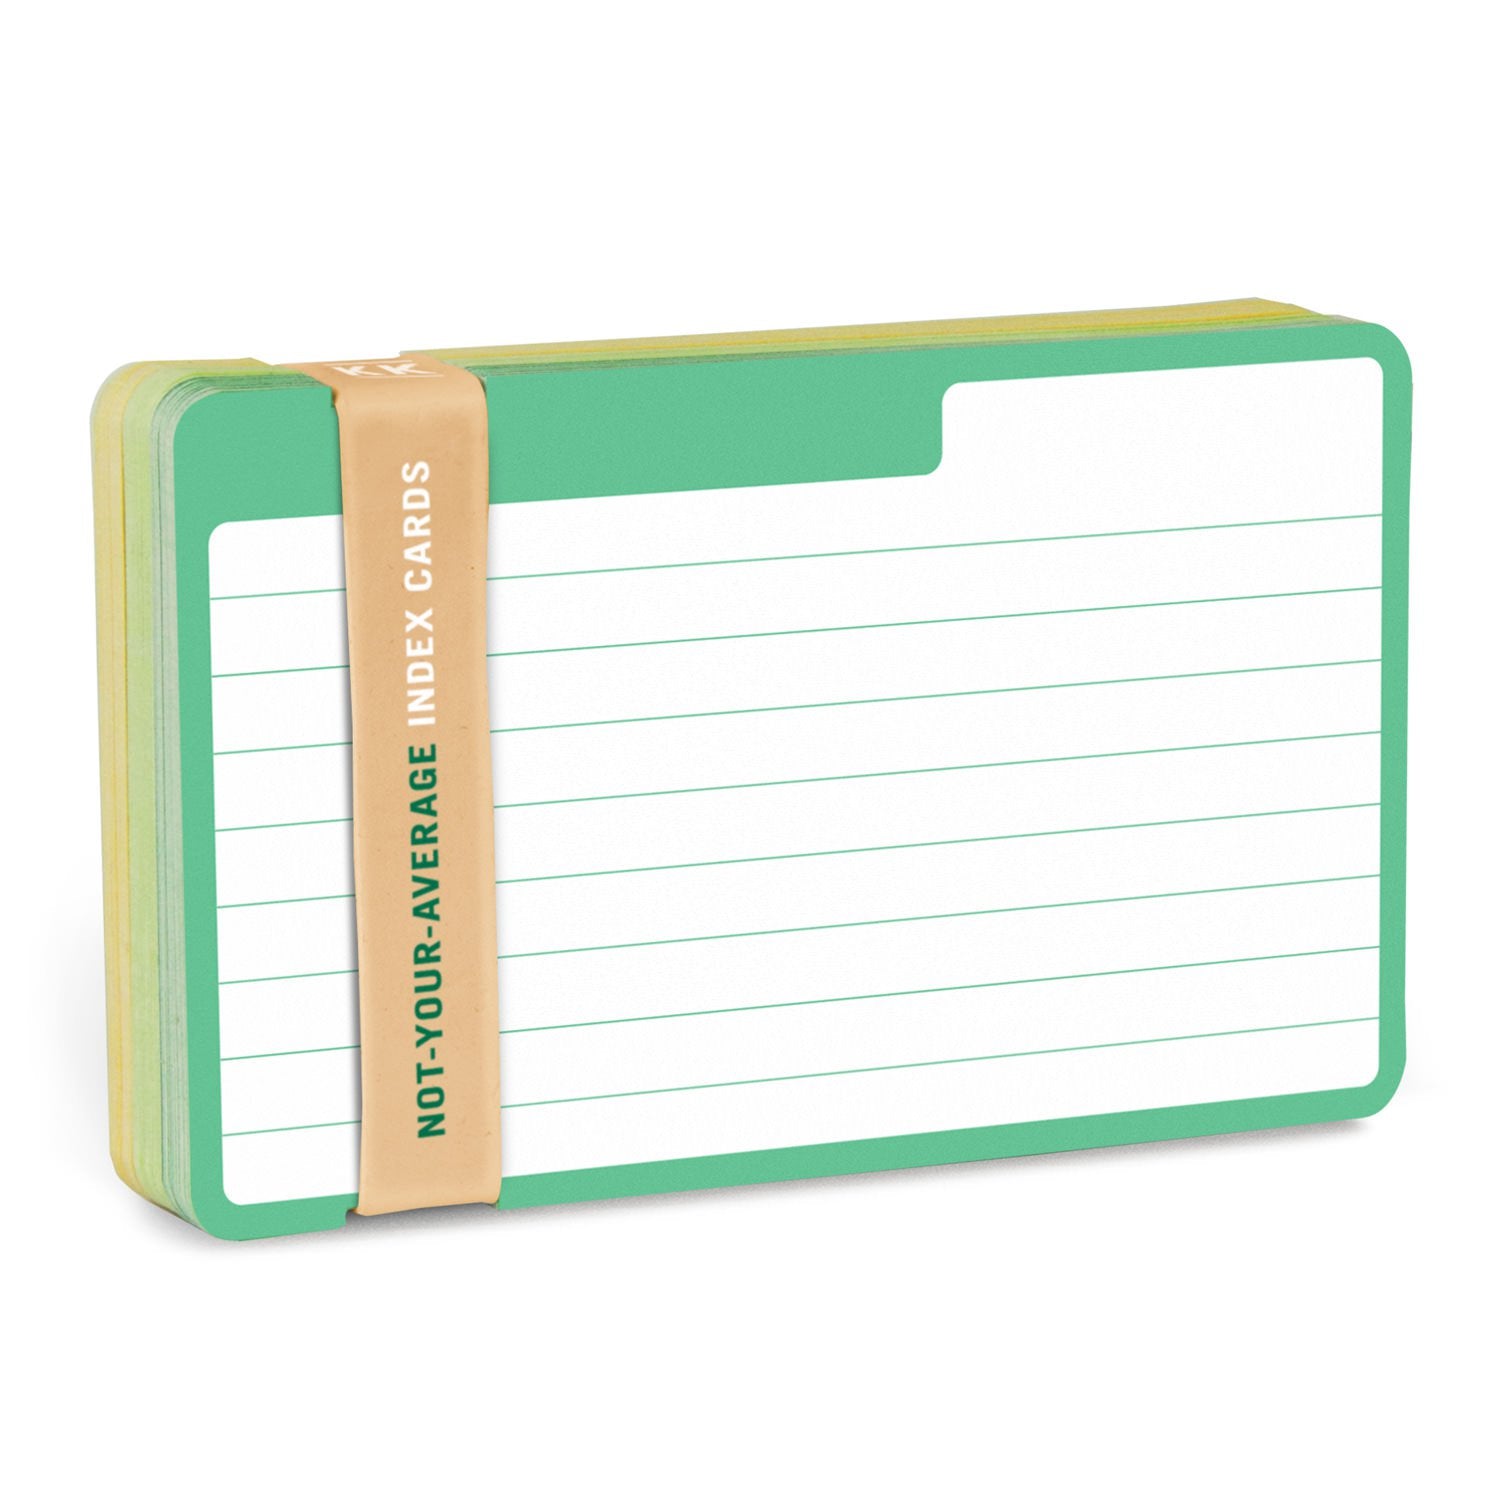 Knock Knock Tabbed Index Cards